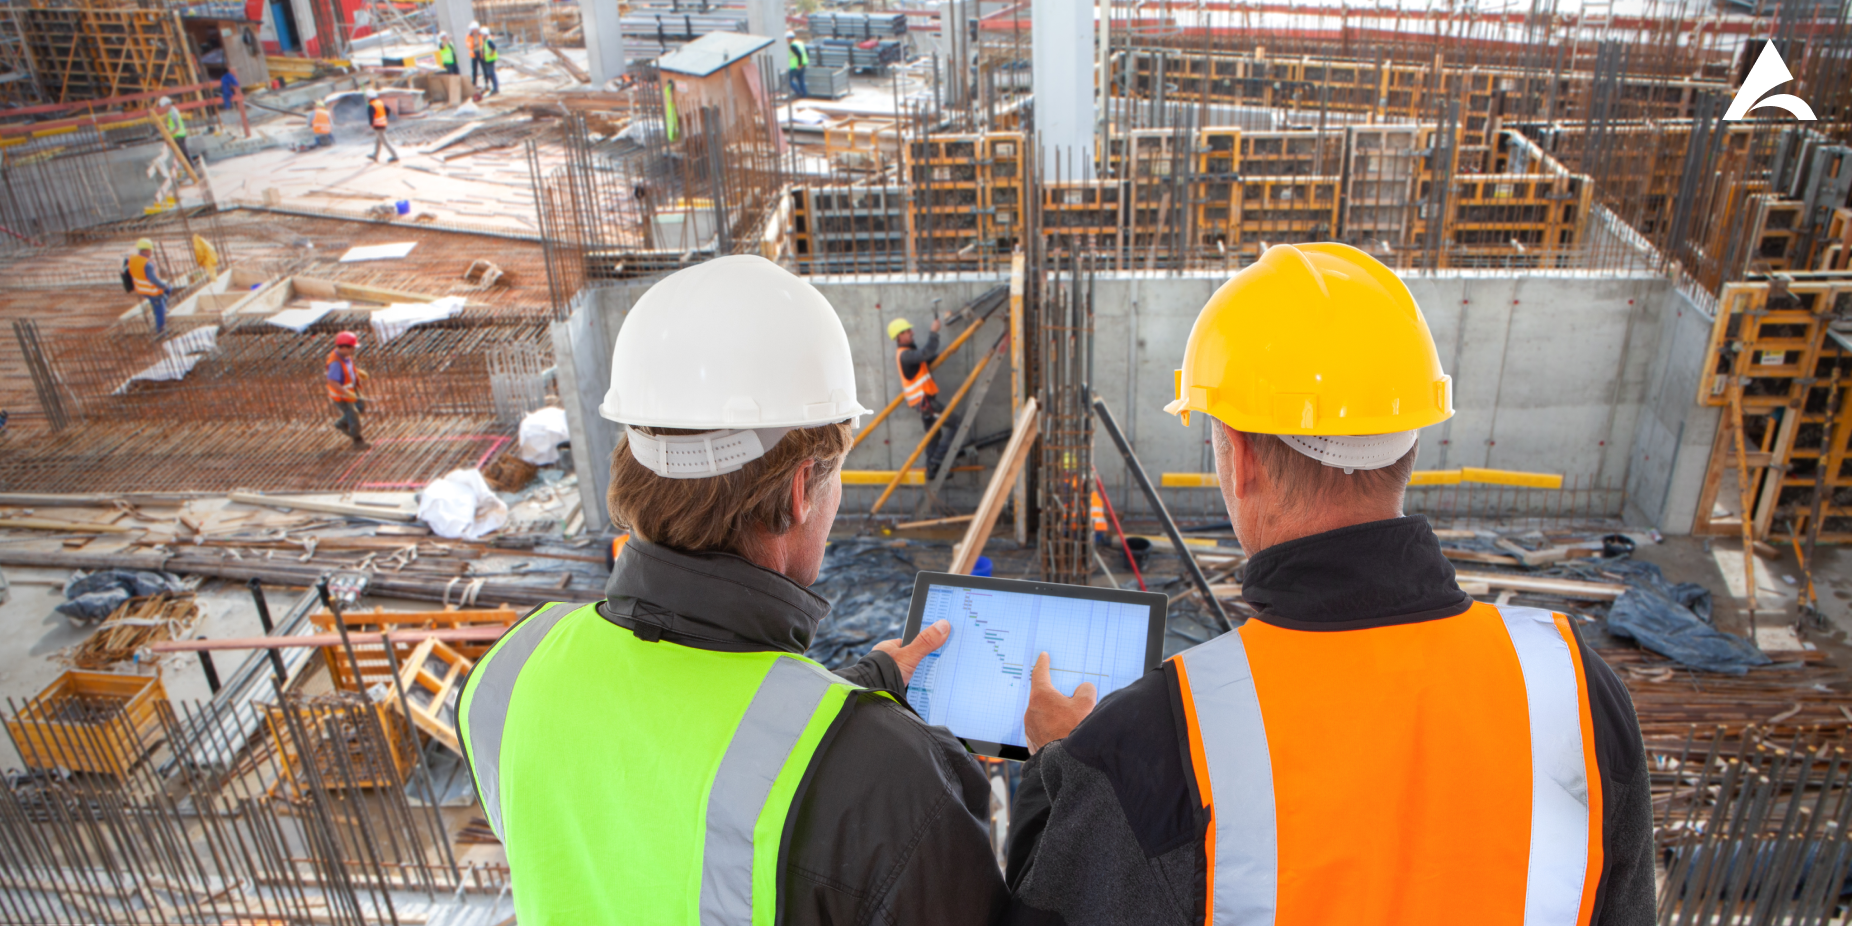 4 Computer Vision Apps for Health and Safety on Your Construction Site